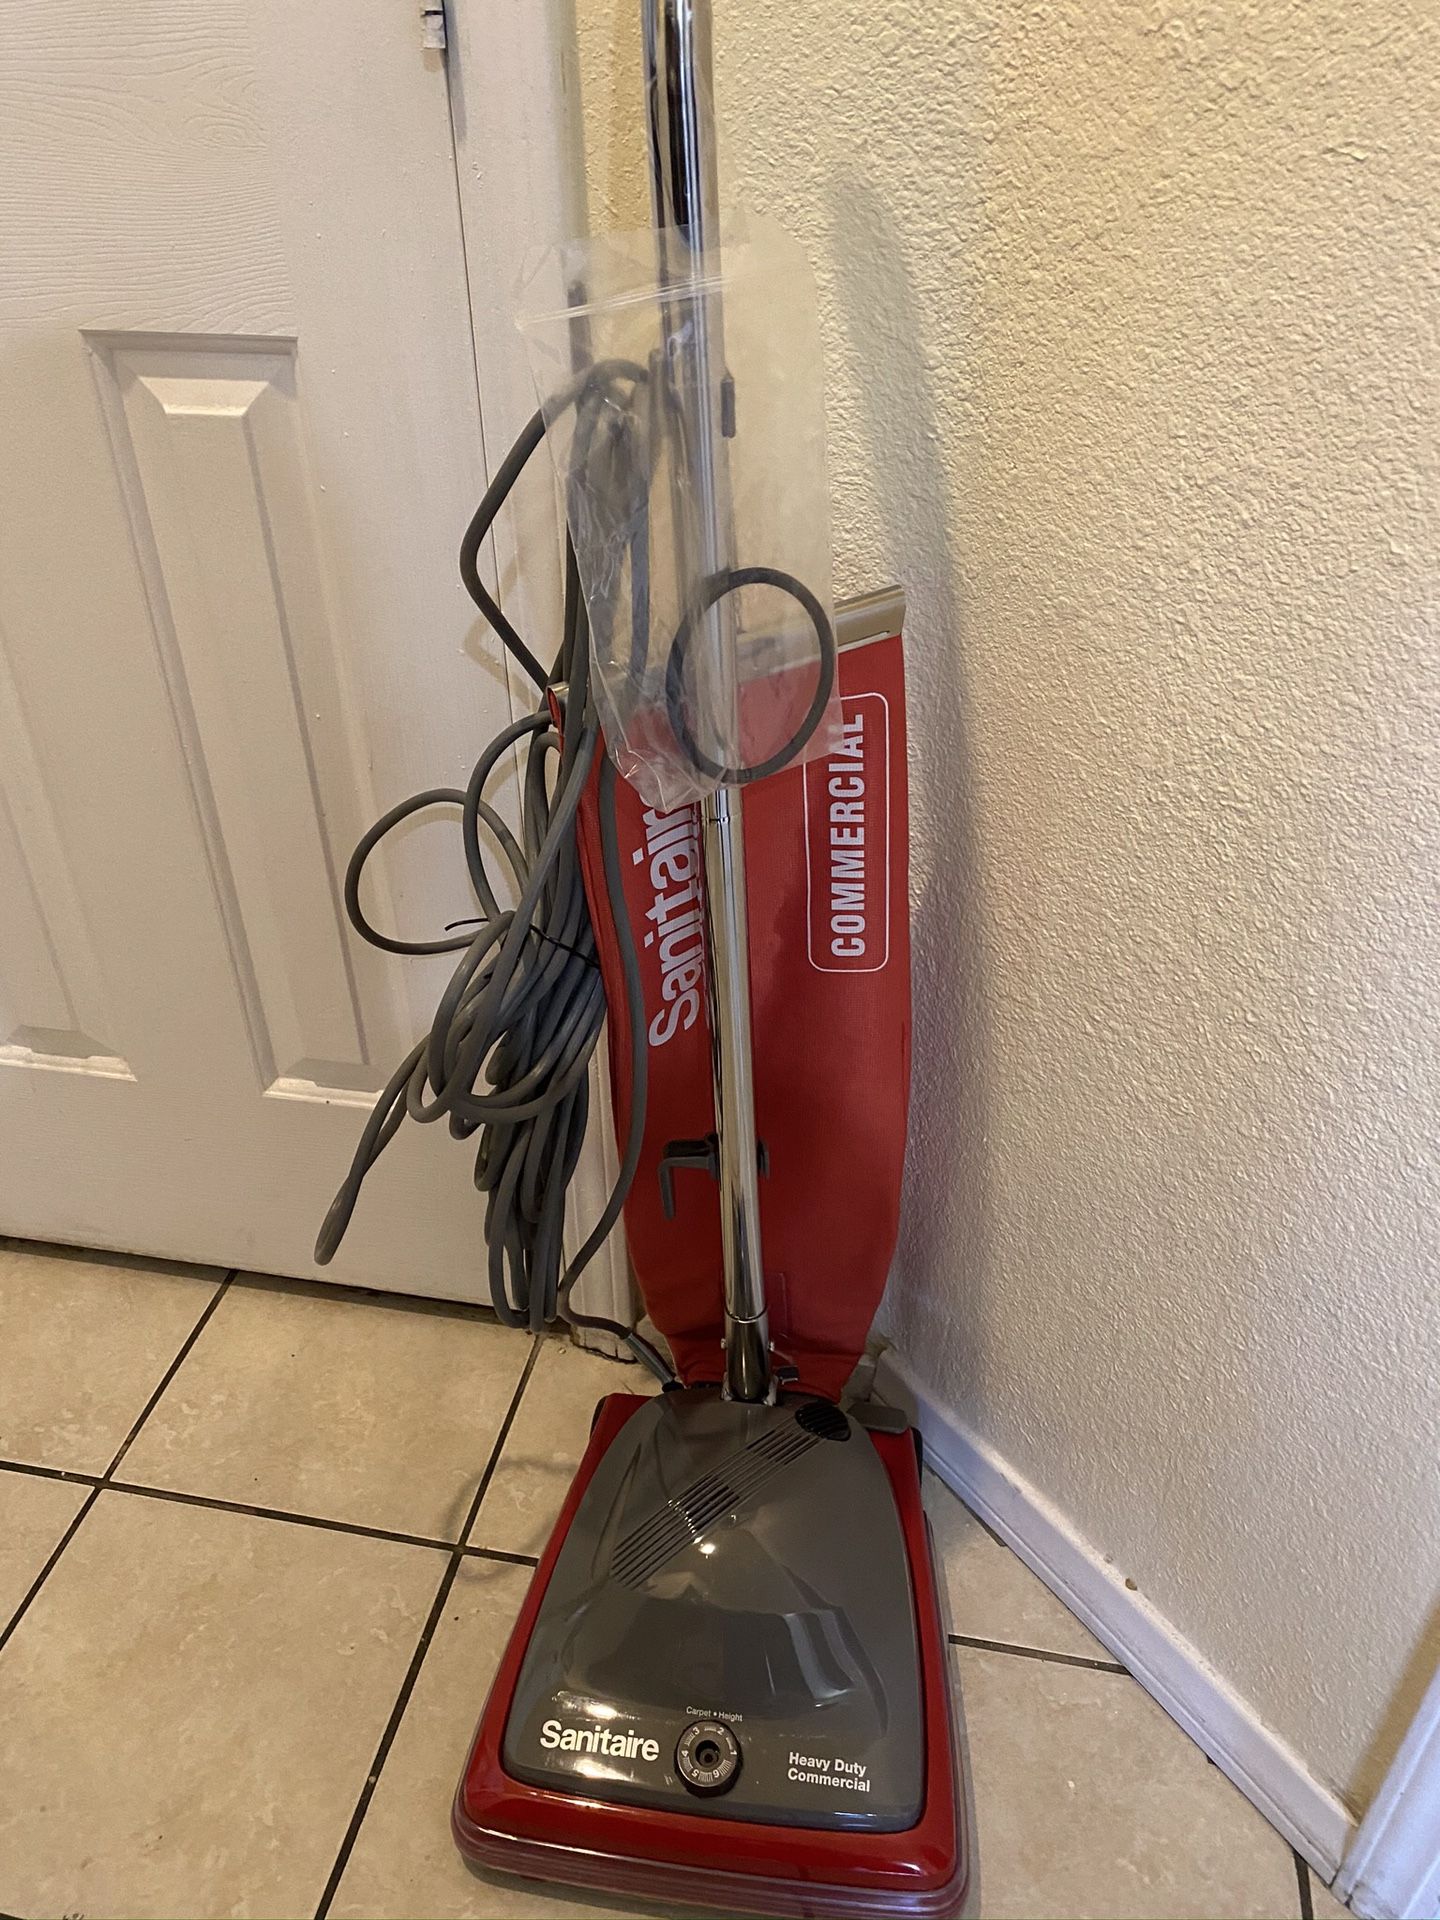 Sanitaire upright commercial bagged vacuum Red vacuum cleaner brand new never used comes in original box